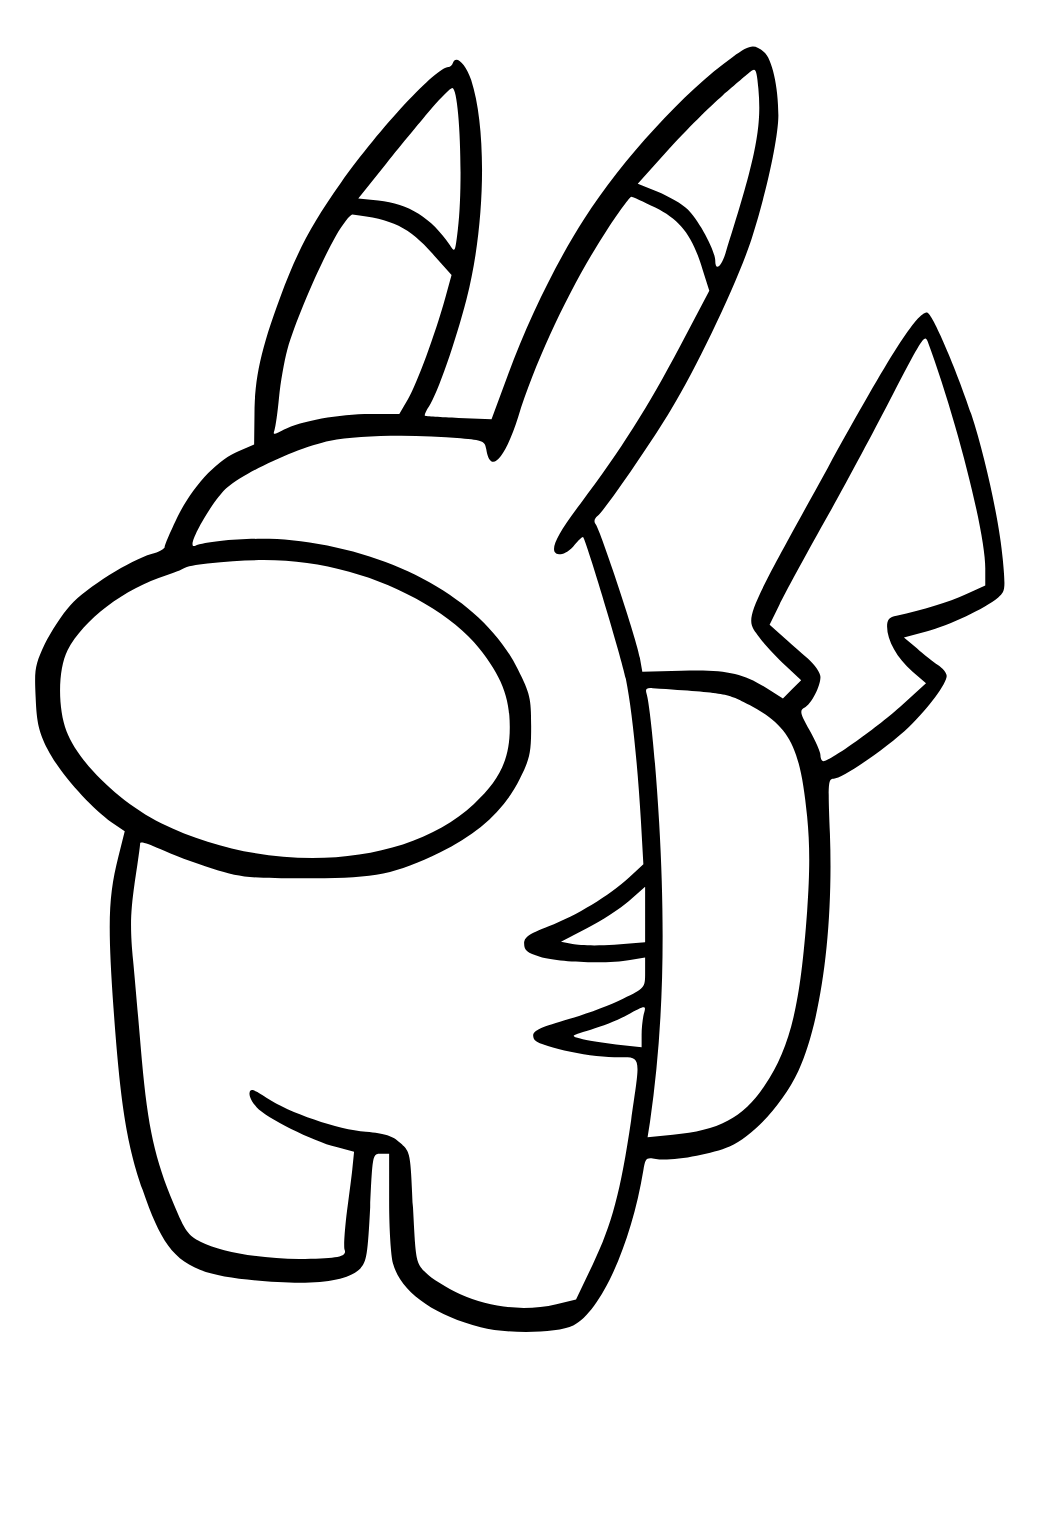 Free Printable Among Us Pikachu Coloring Page, Sheet and Picture for Adults  and Kids (Girls and Boys) - Babeled.com